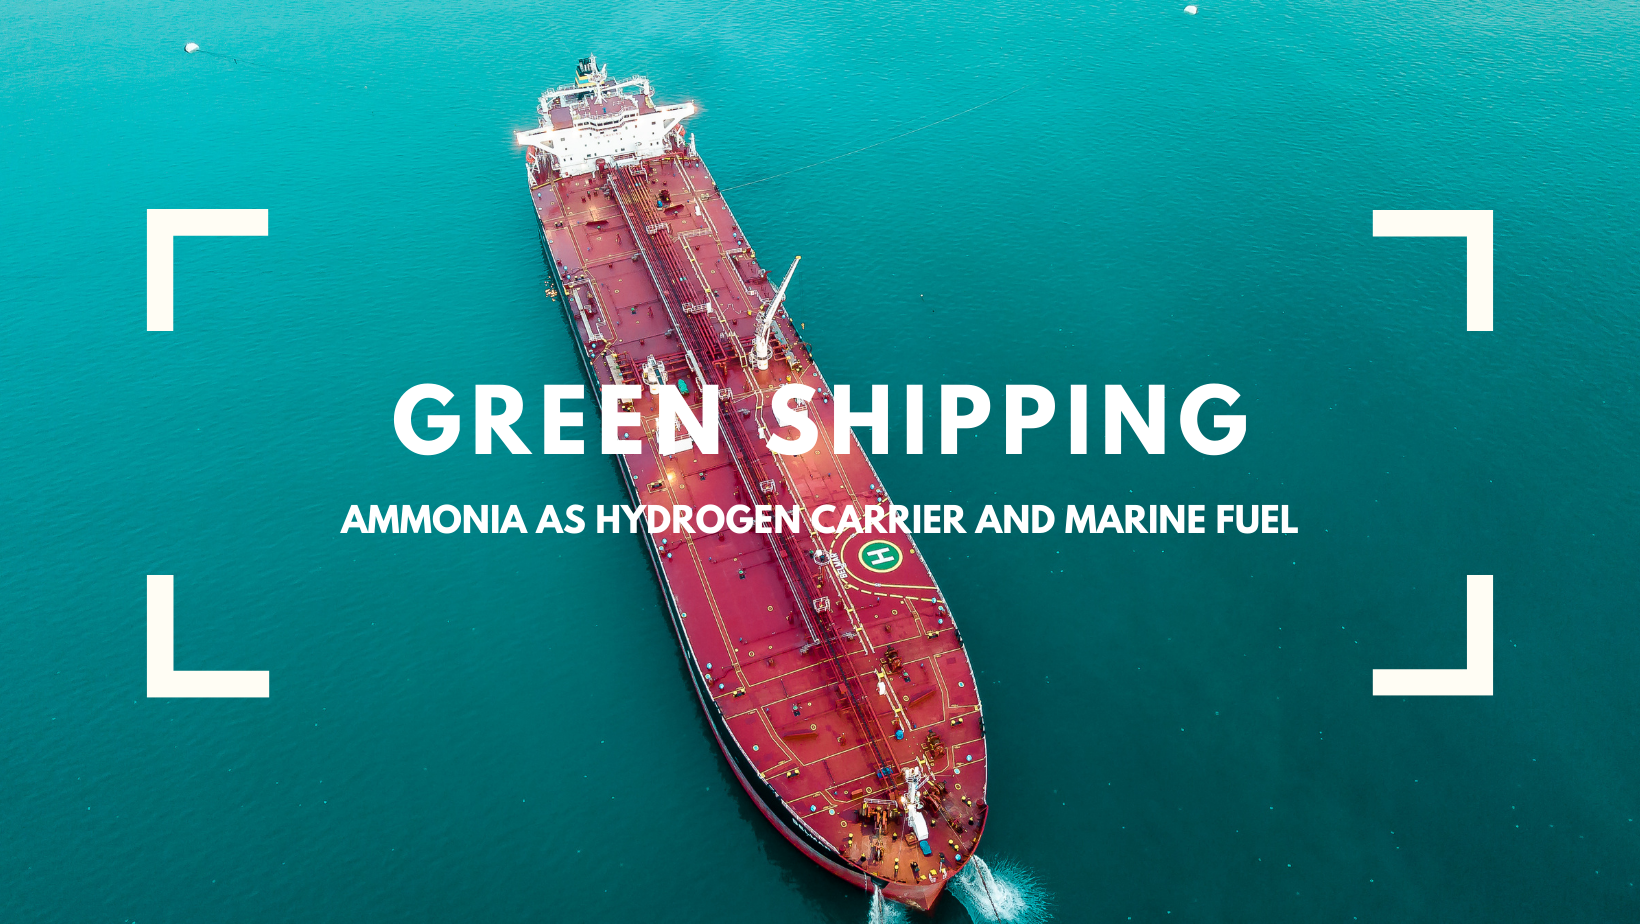 Green Shipping: Ammonia as Hydrogen Carrier and Marine Fuel